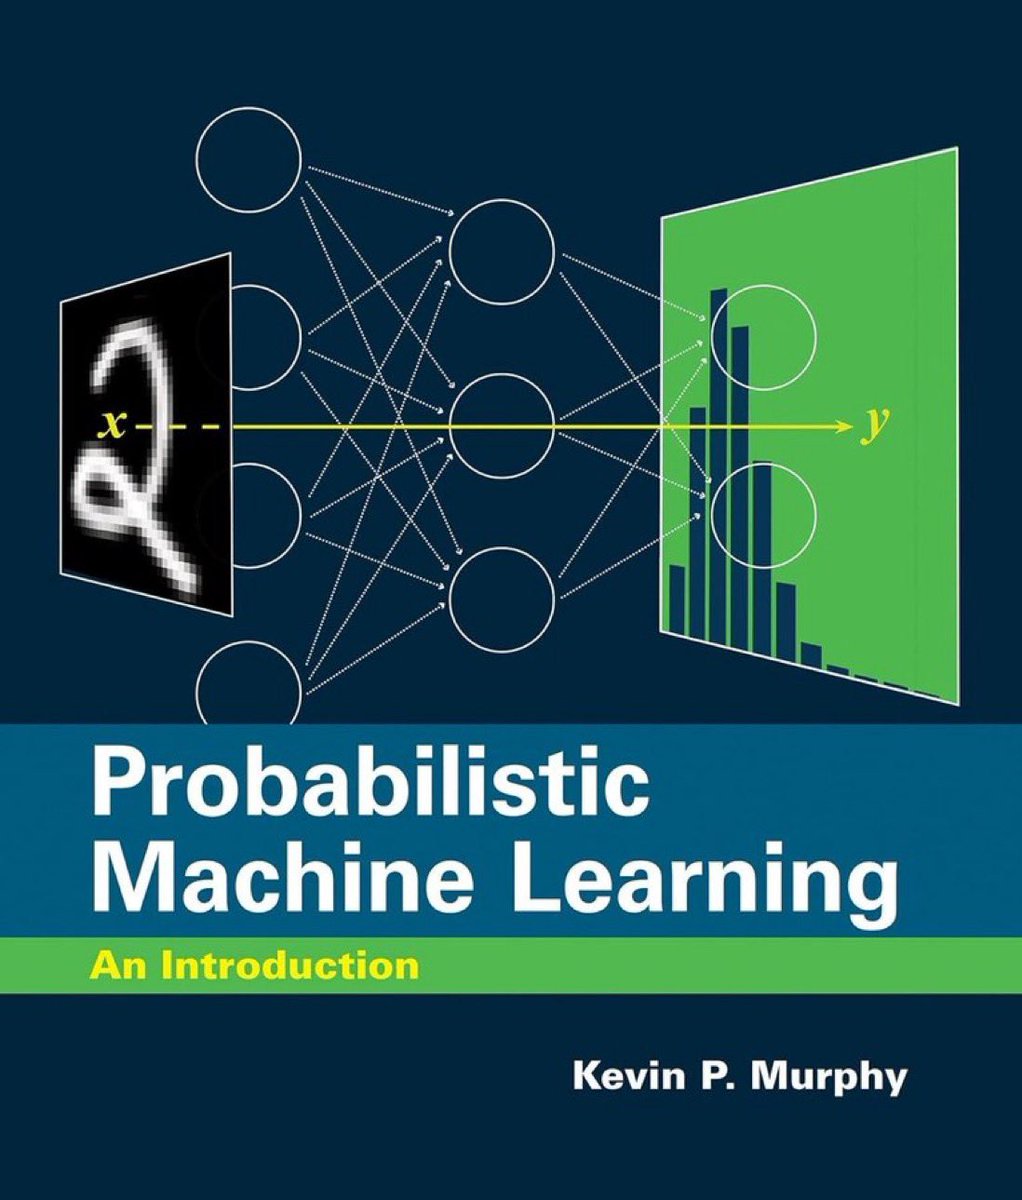 Probabilistic #MachineLearning — An INTRODUCTION (2nd Ed. 2022, 858-page PDF): bit.ly/3seAc5G by @sirbayes
➕
Get the print copy: amzn.to/48broB3
——————
#AI #DeepLearning #BigData #DataScience #Mathematics #Probability #Statistics #LinearAlgebra #NeuralNetworks